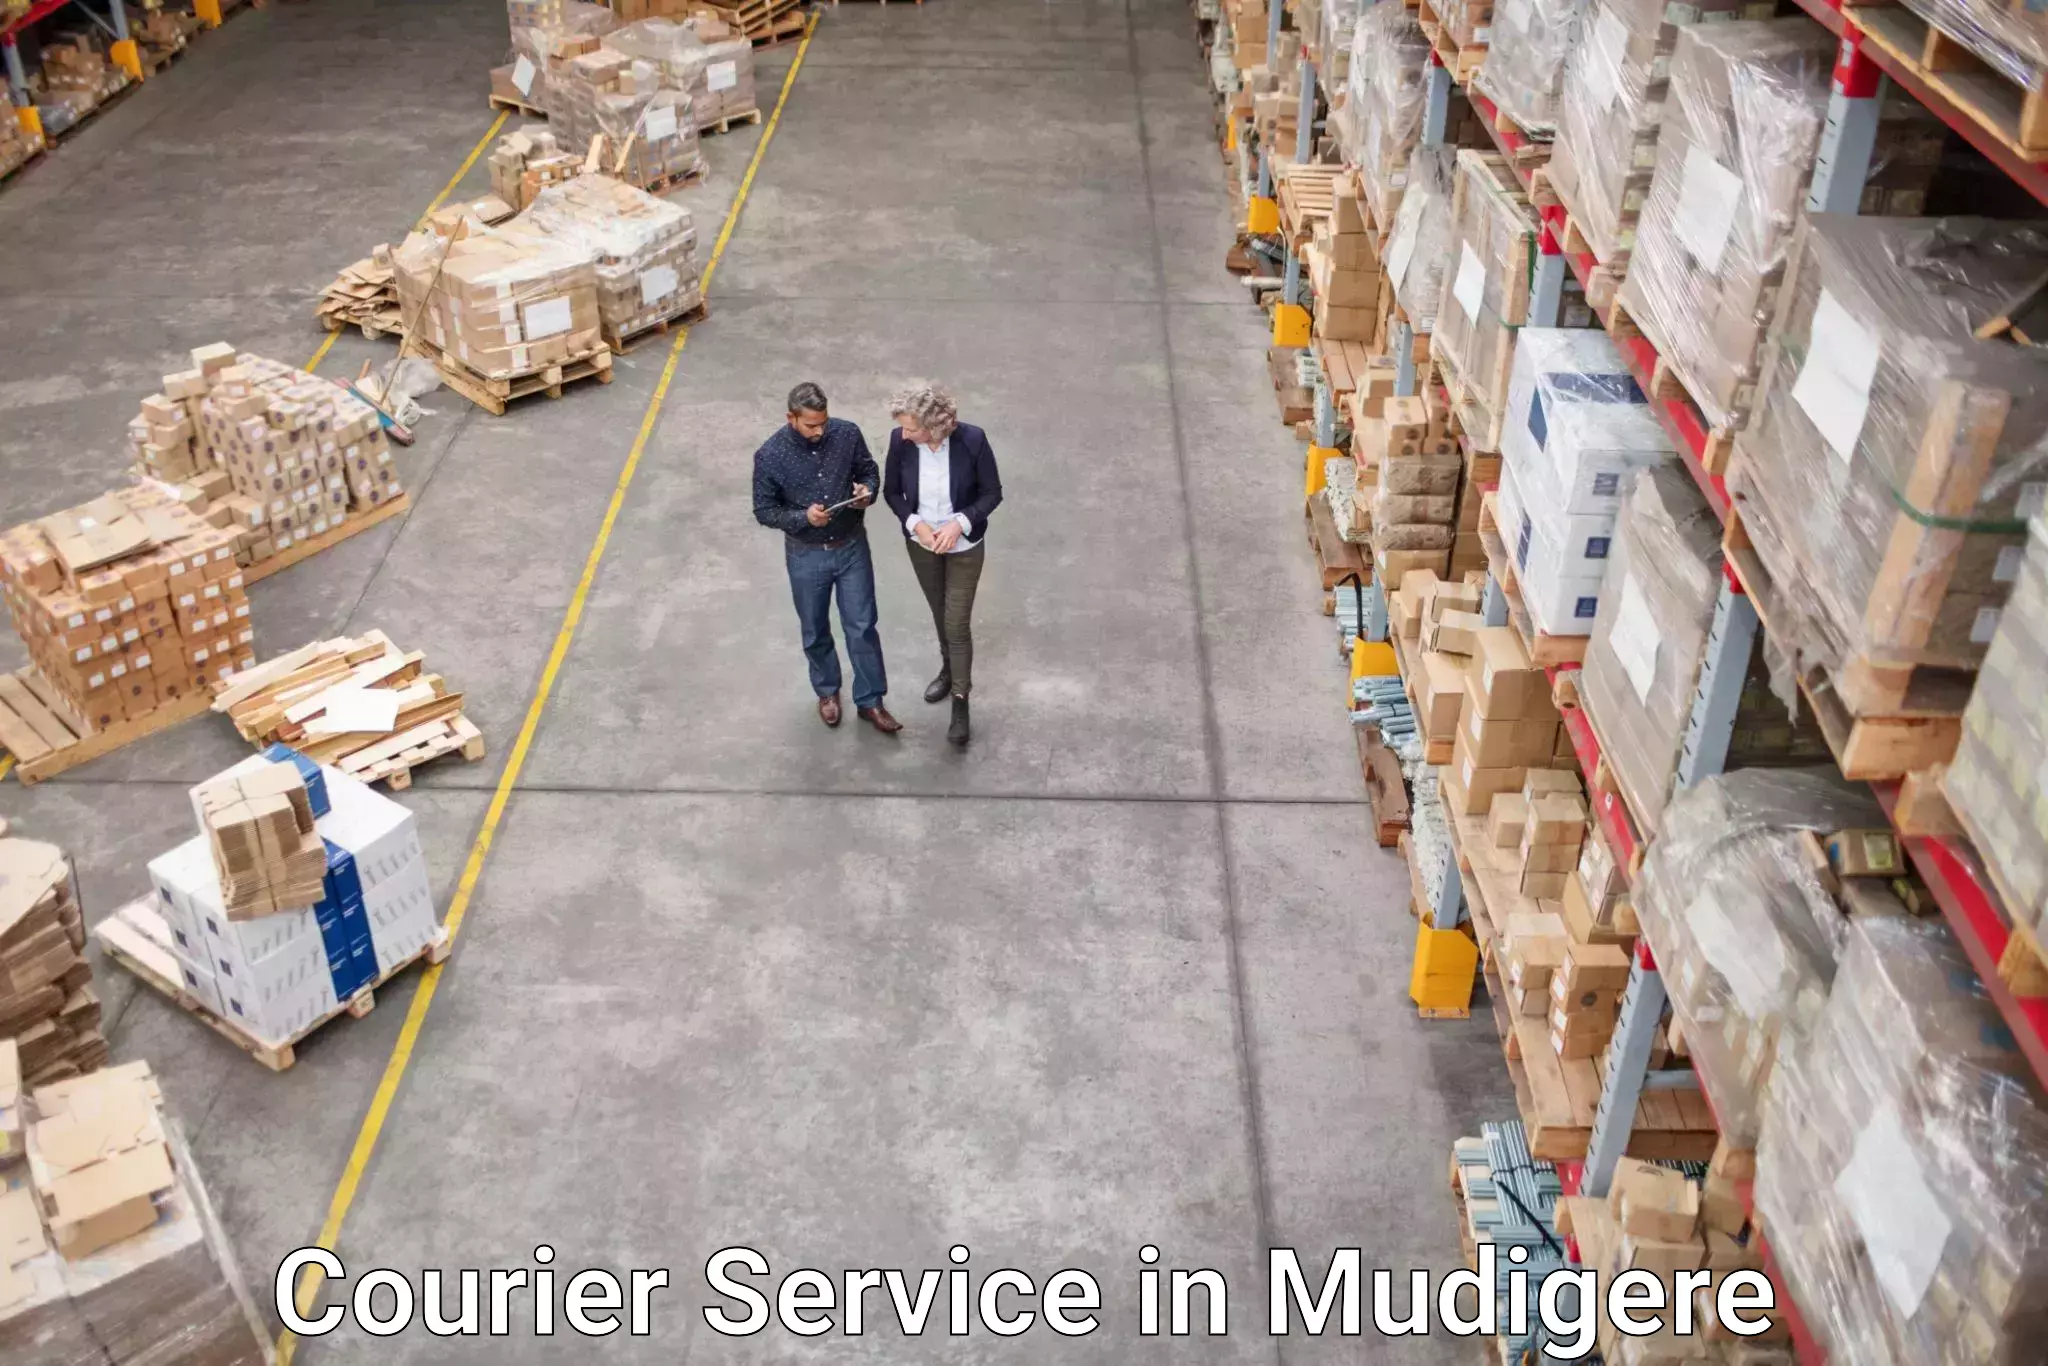 Integrated courier services in Mudigere